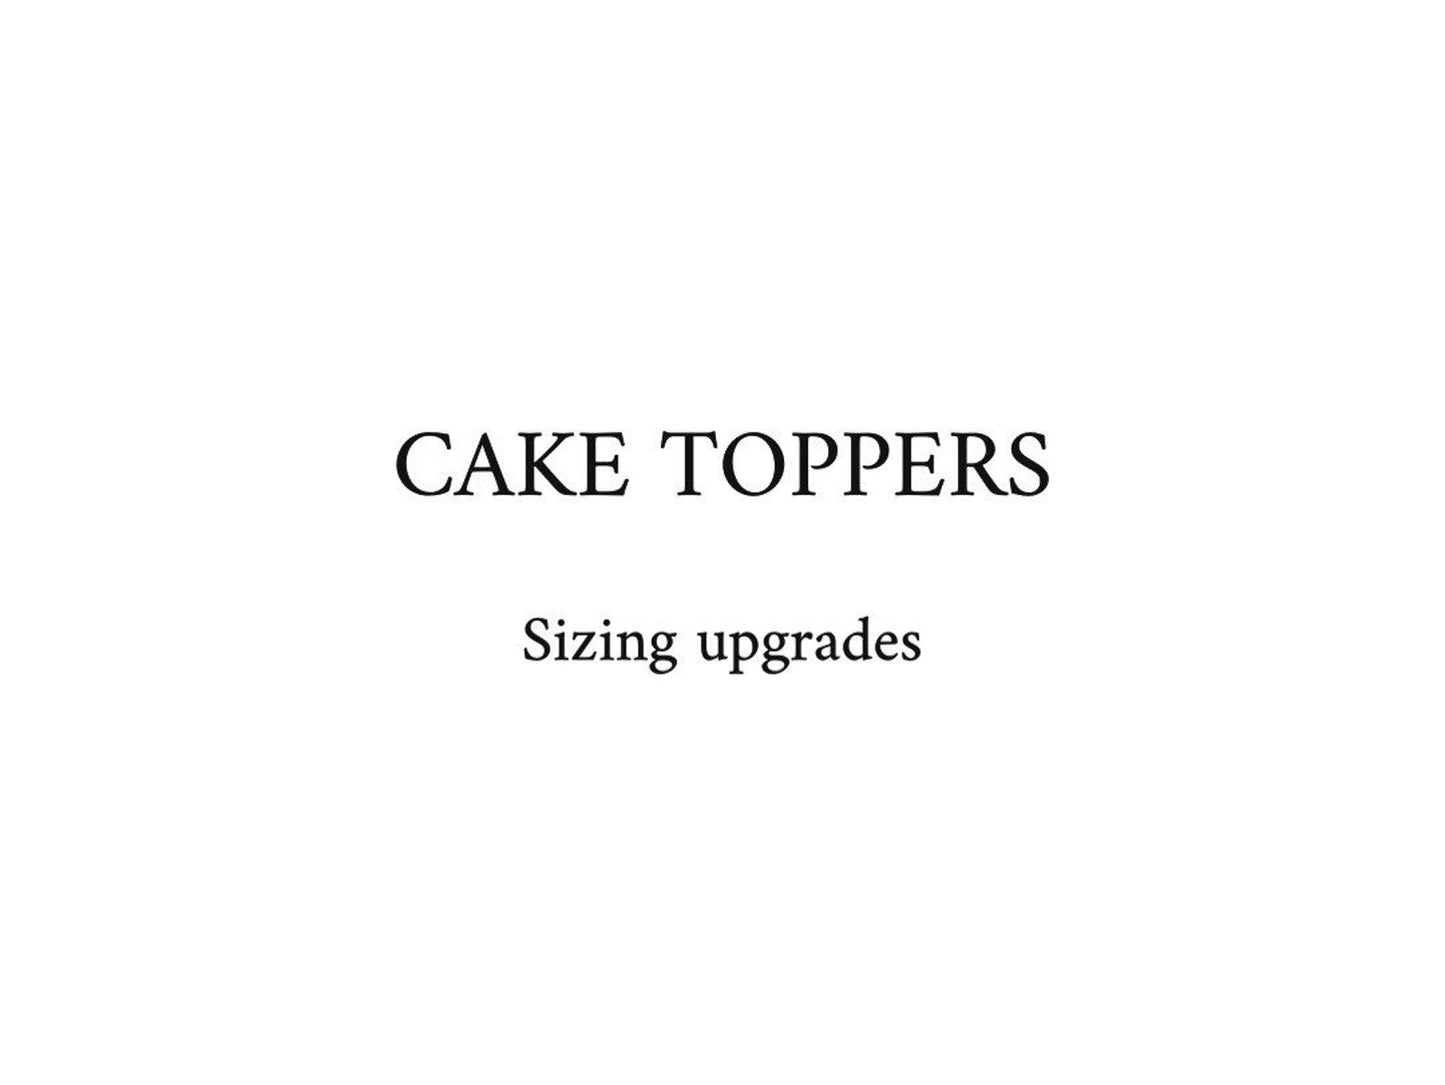 Sizing upgrade for acrylic cake toppers